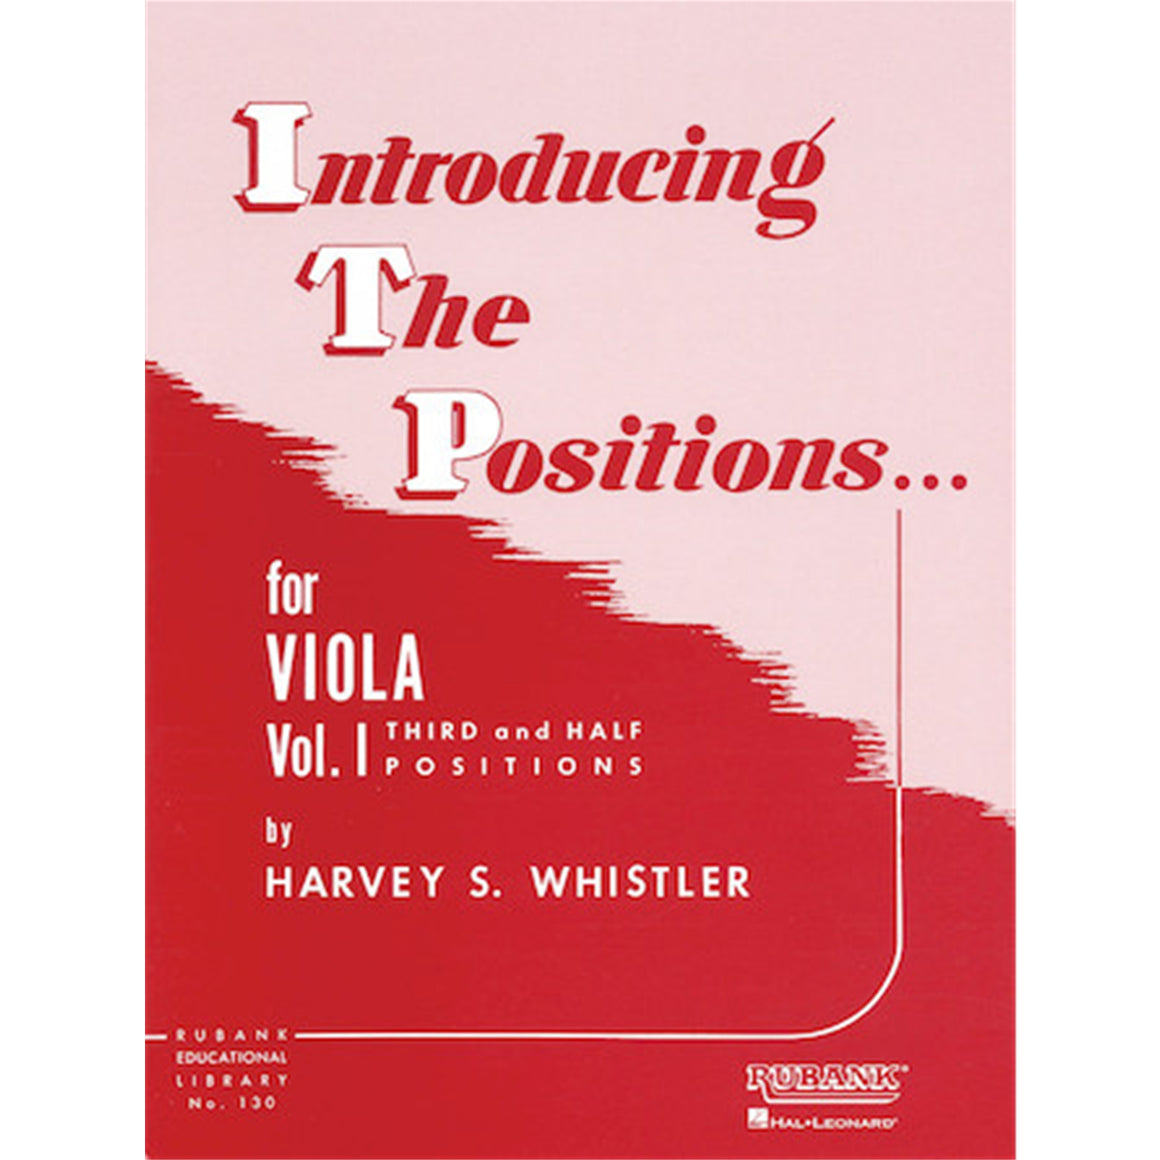 HAL LEONARD 4472790 Introducing the Positions for Viola Volume 1 - Third and Half Positions